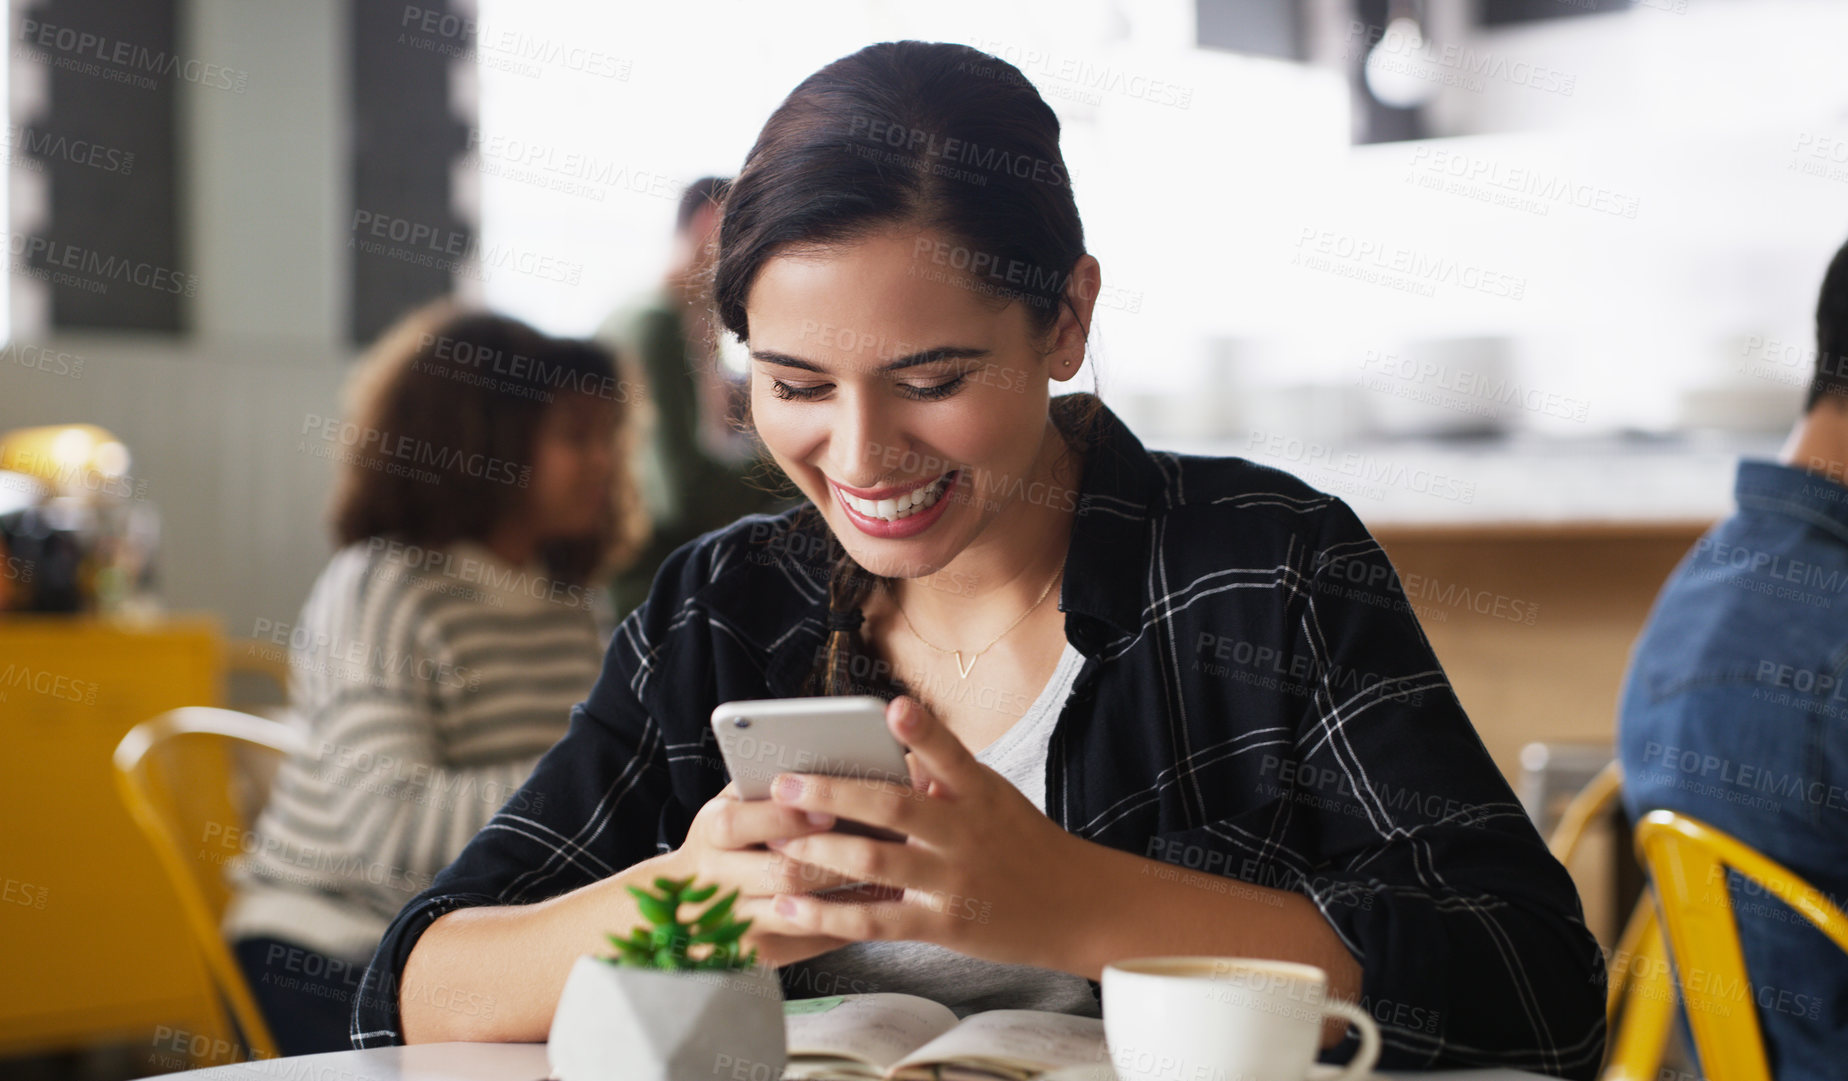 Buy stock photo Shot of an attractive young woman using a cellphone in a cafe